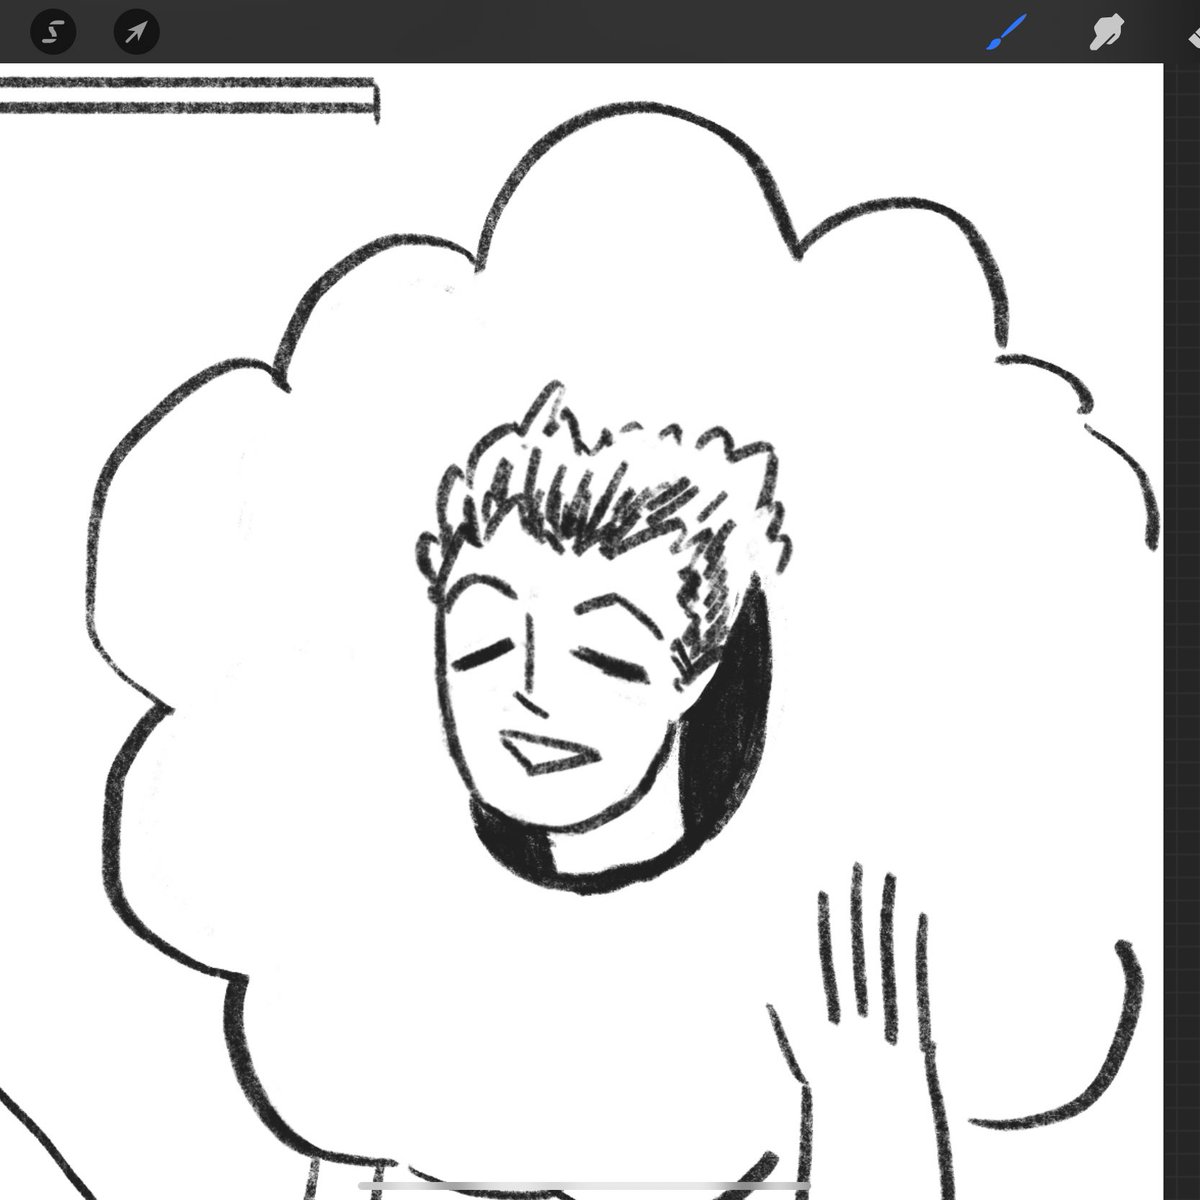 wip wednesday only it's not wednesday and I feel like bokuto in the last 2 